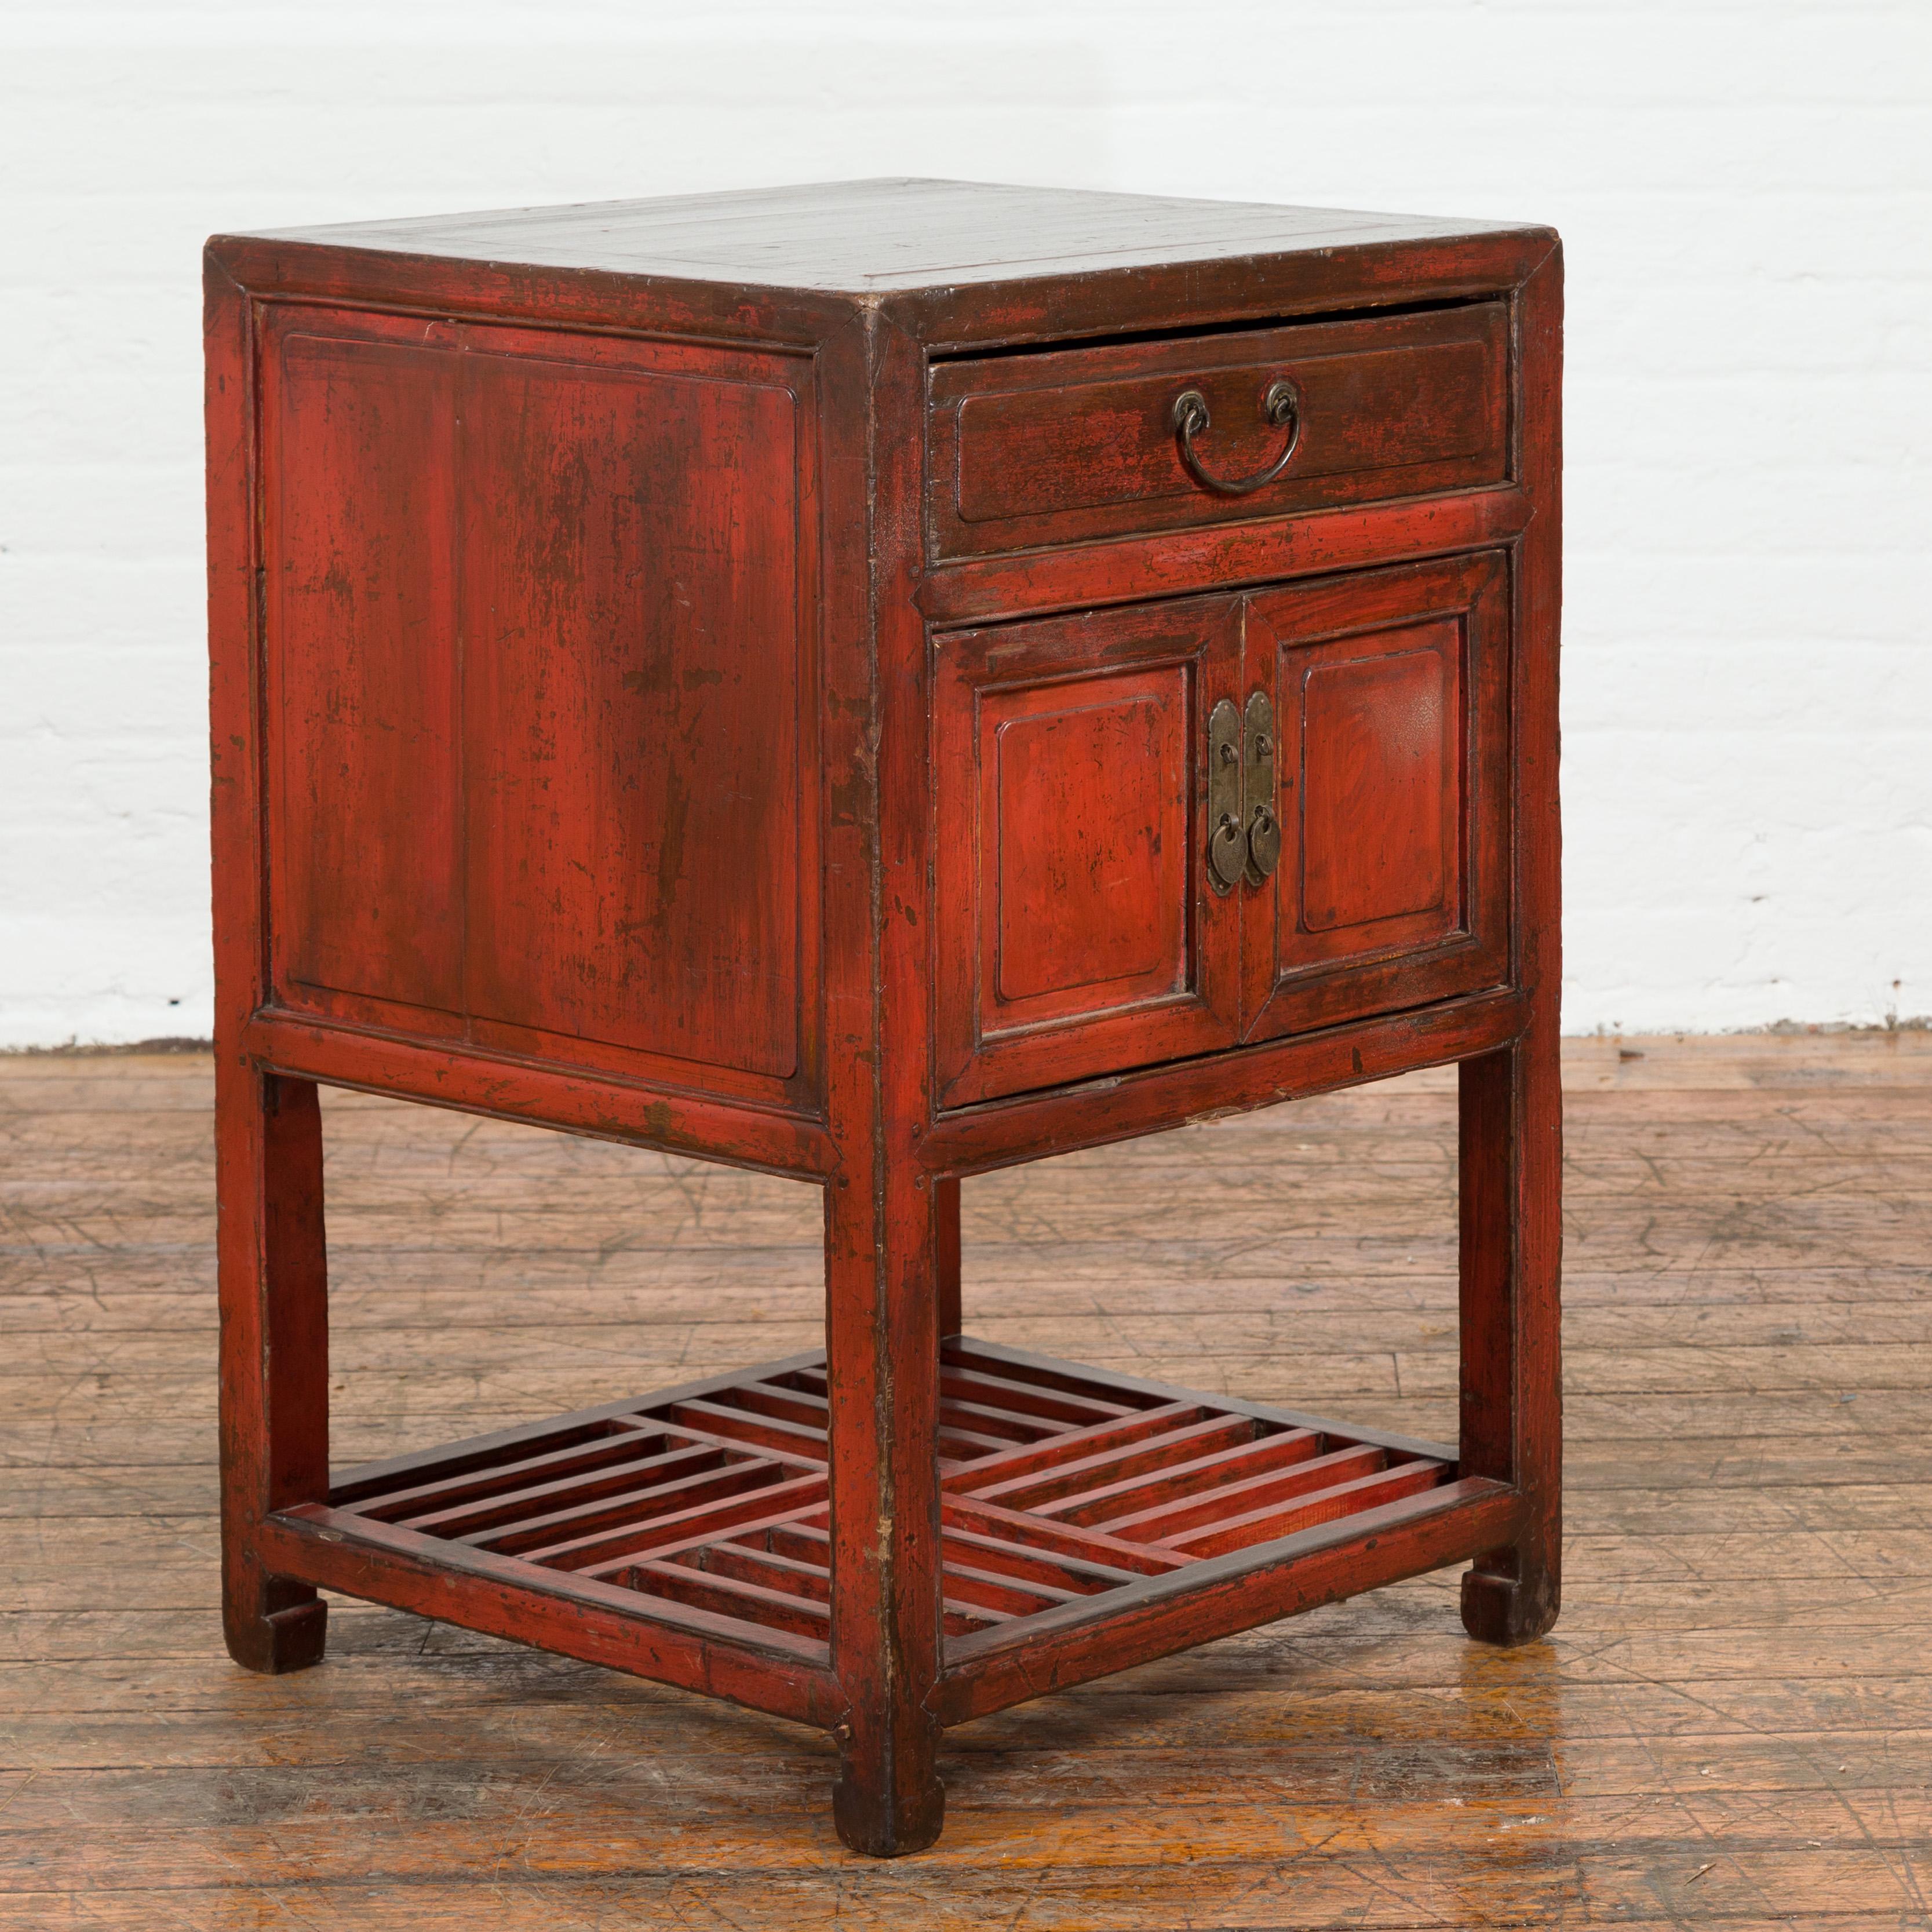 A Chinese Qing Dynasty red lacquer pedestal cabinet from the 19th century with single drawer, double doors and geometric shelf. Created in China during the Qing Dynasty, this small pedestal cabinet features a square top with central board, sitting